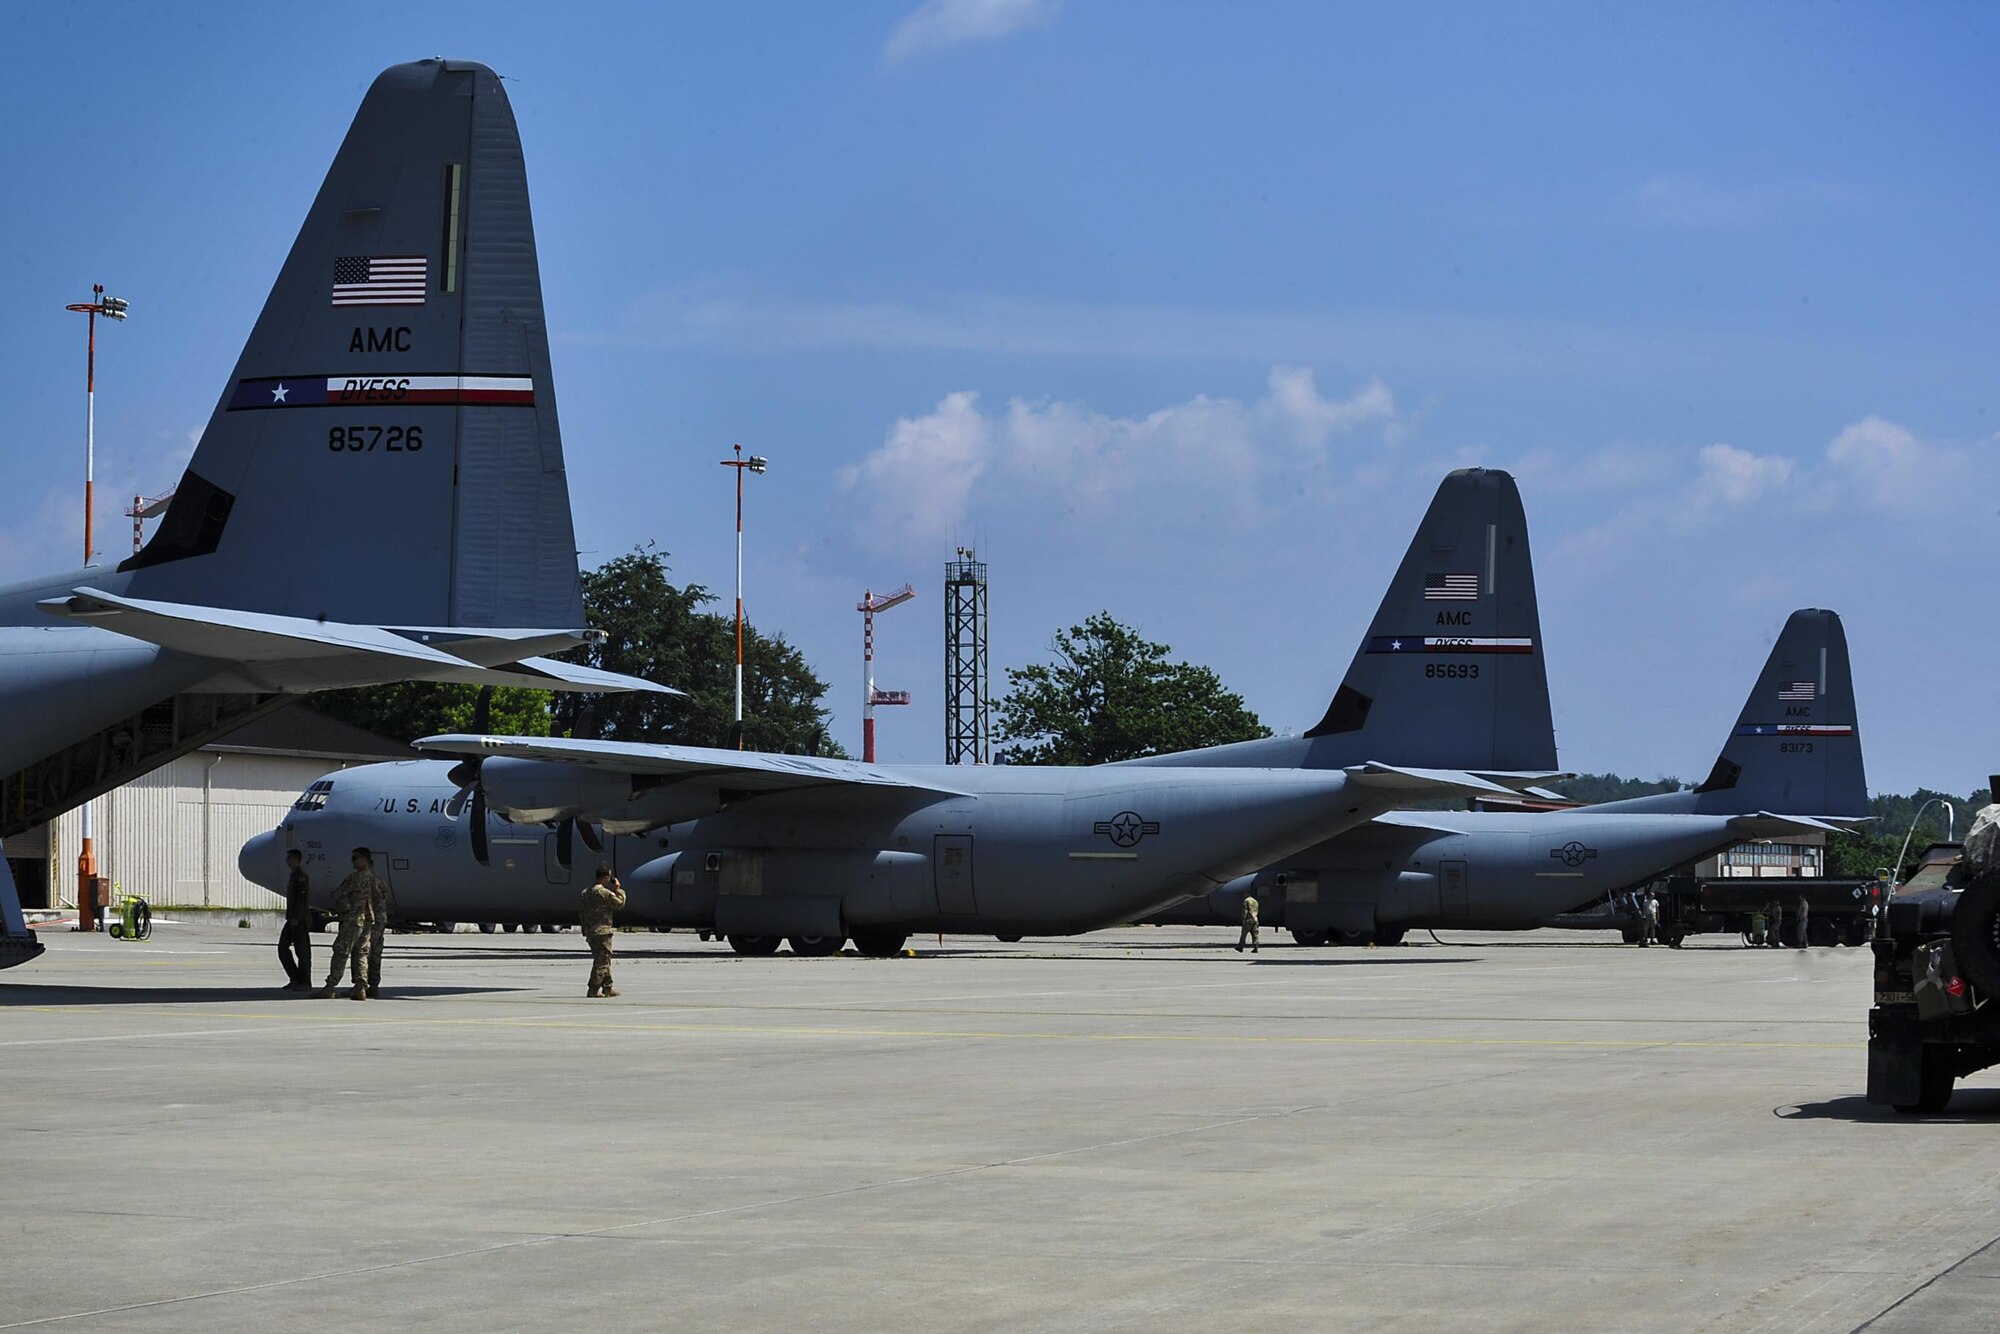 Dyess Air Force Base airframes sit on the flightline during a refueling June 9, 2016 at Ramstein Air Base, Germany. The aircraft refueled before returning to Poland to participate in this year’s Exercise Swift Response 2016. (U.S. Air Force photo/Senior Airman Larissa Greatwood)